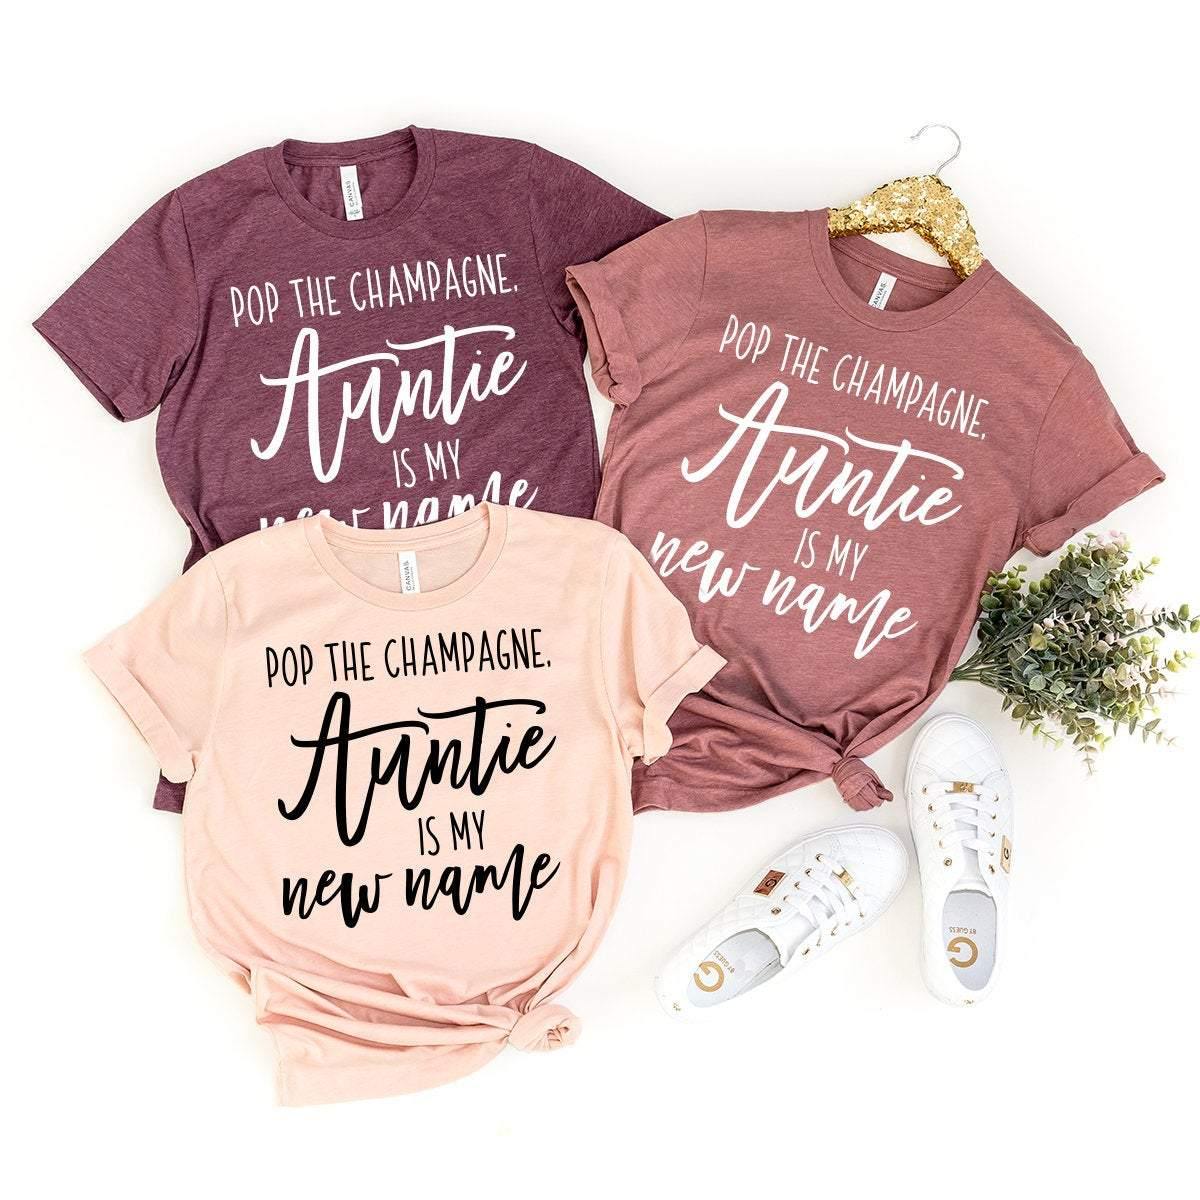 Funny Aunt T-Shirt, Pop The Champagne Auntie Is My New Name Shirt, New Aunt T shirt, Best Aunt Ever Tee, New Auntie Tee, New Aunt Gift - Fastdeliverytees.com